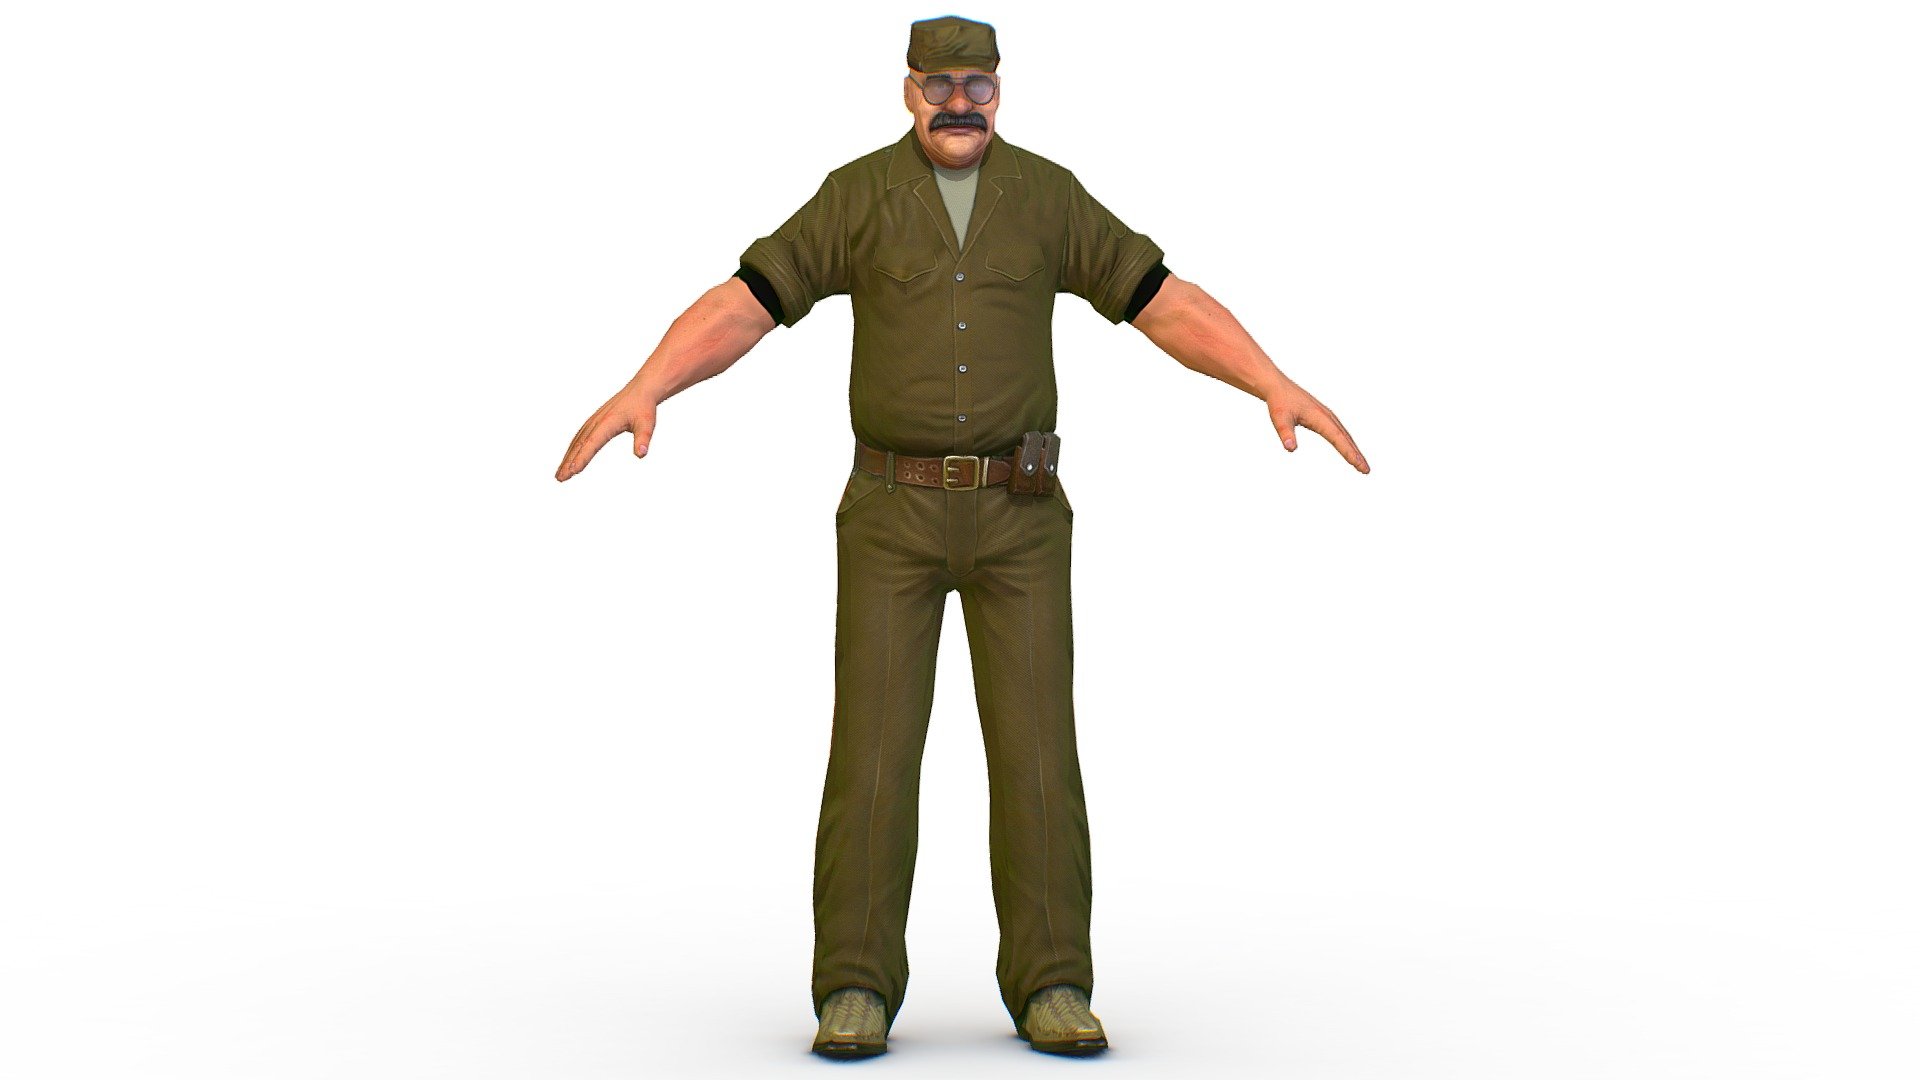 High quality LOW POLY 3d model for your game,render image or video.
textures size: 2x1024x1024 color,normal,specular (body,head)
3dsMax and Maya file included
 - LowPoly Man Boss Slave Driver Chief Soldier - Buy Royalty Free 3D model by Oleg Shuldiakov (@olegshuldiakov) 3d model